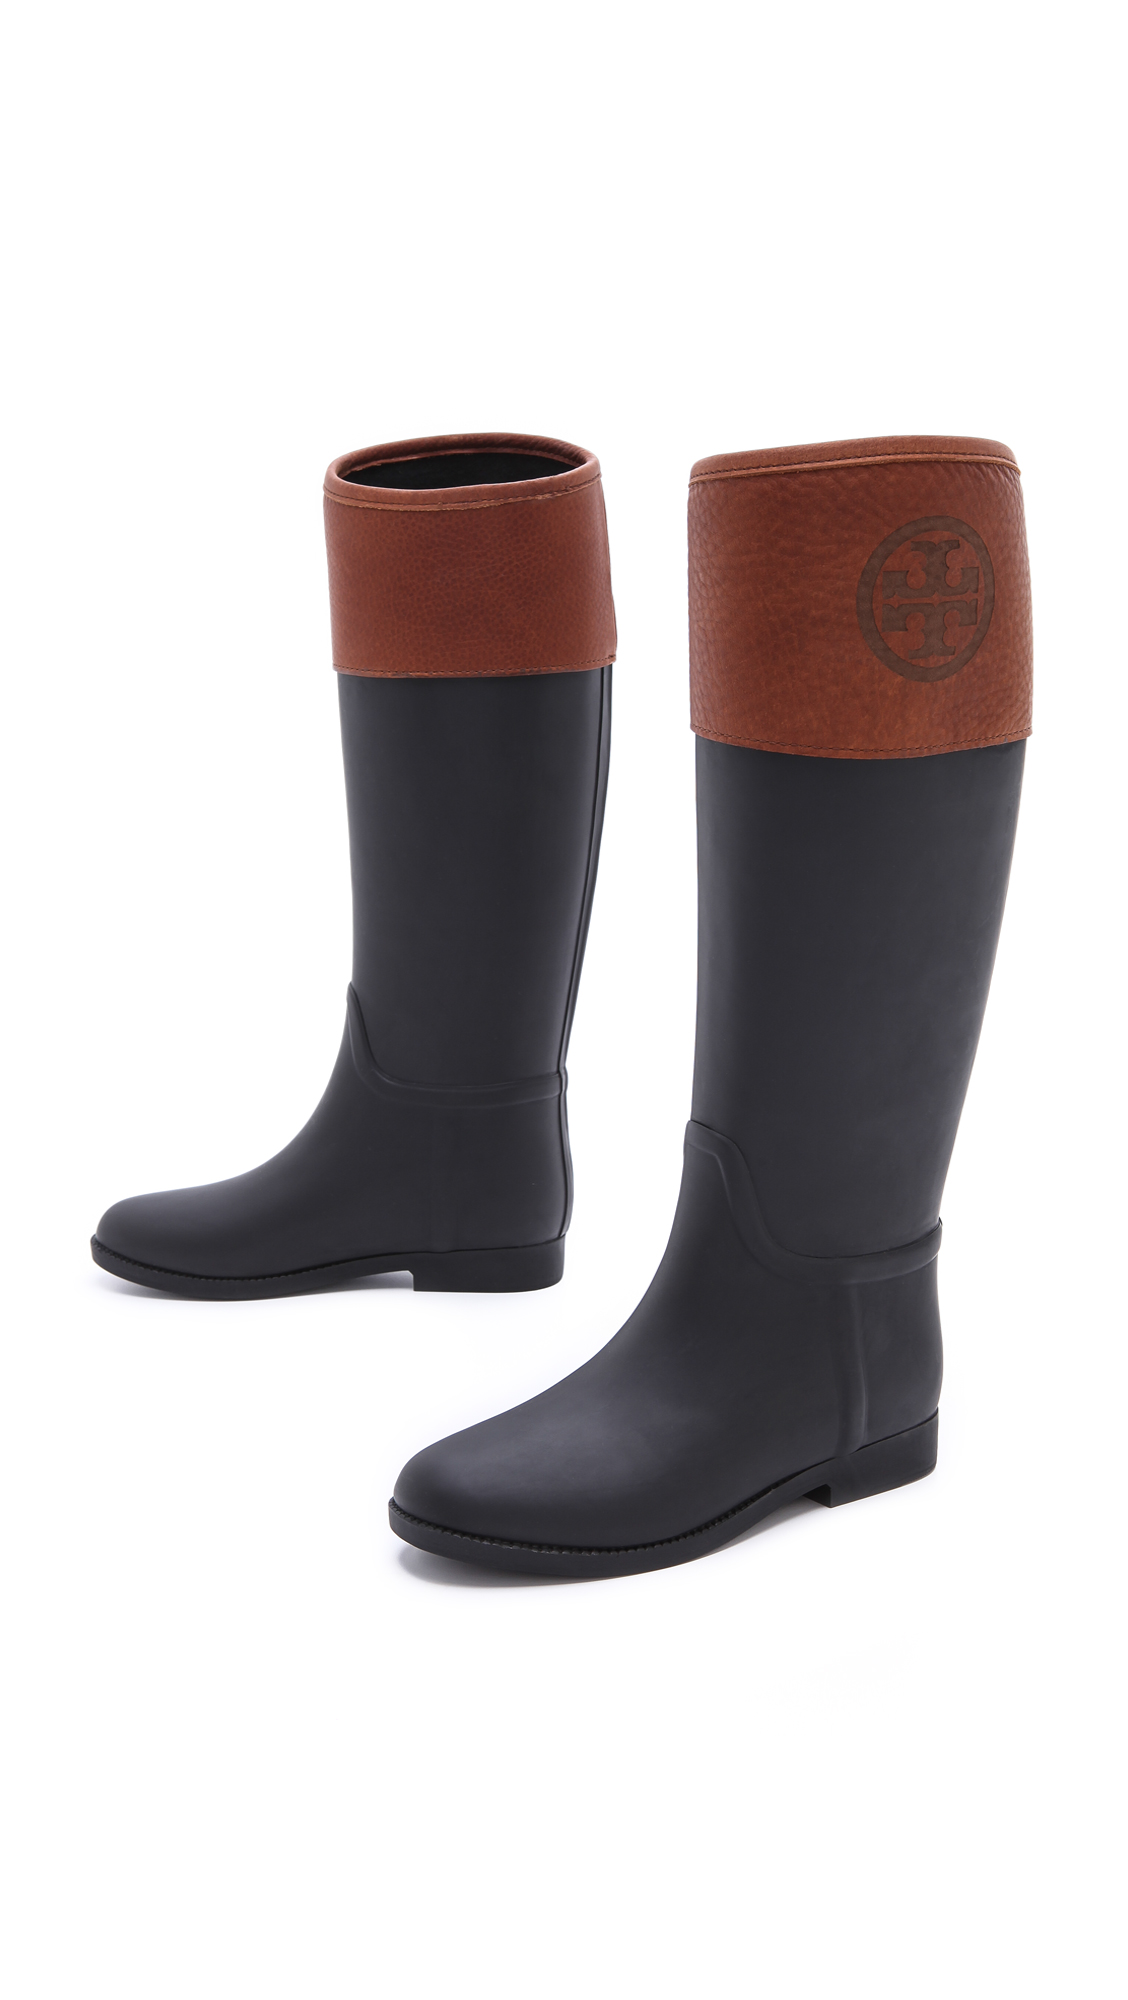 Arriba 36+ imagen tory burch boots brown and black